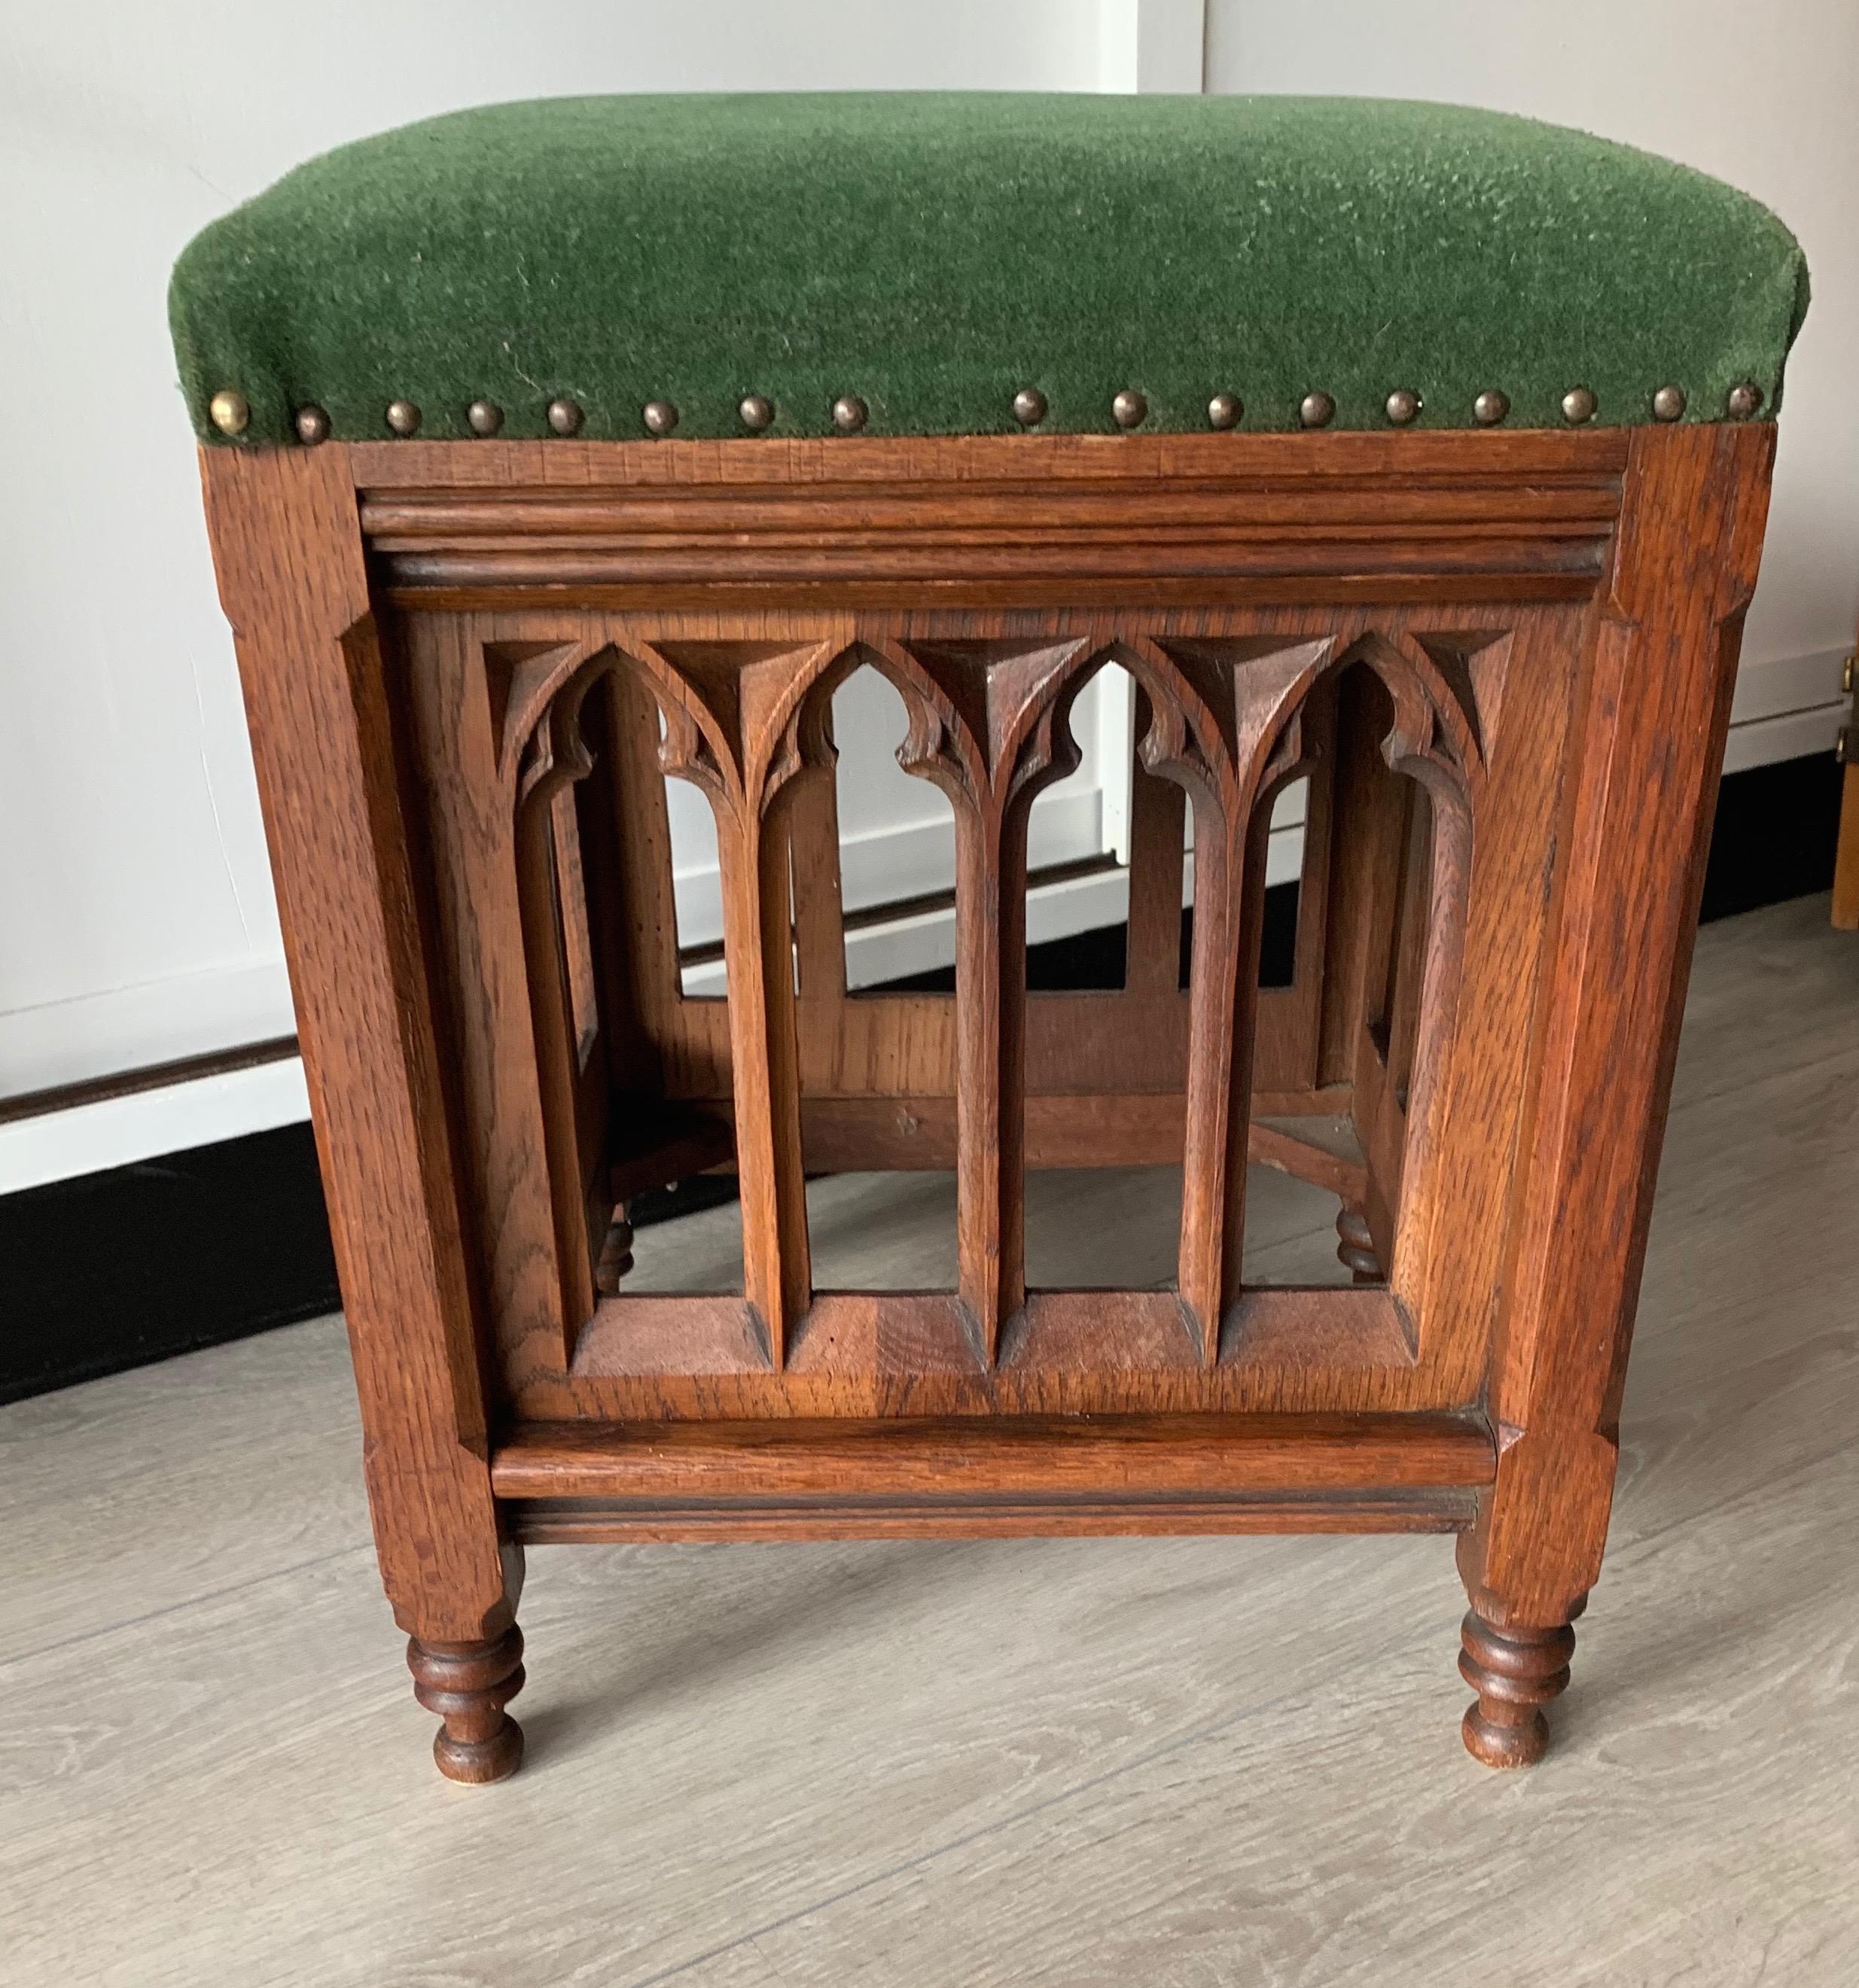 Dutch Unique and Quality Carved Gothic Revival Oak Church Stool Seat w. Velvet Seating